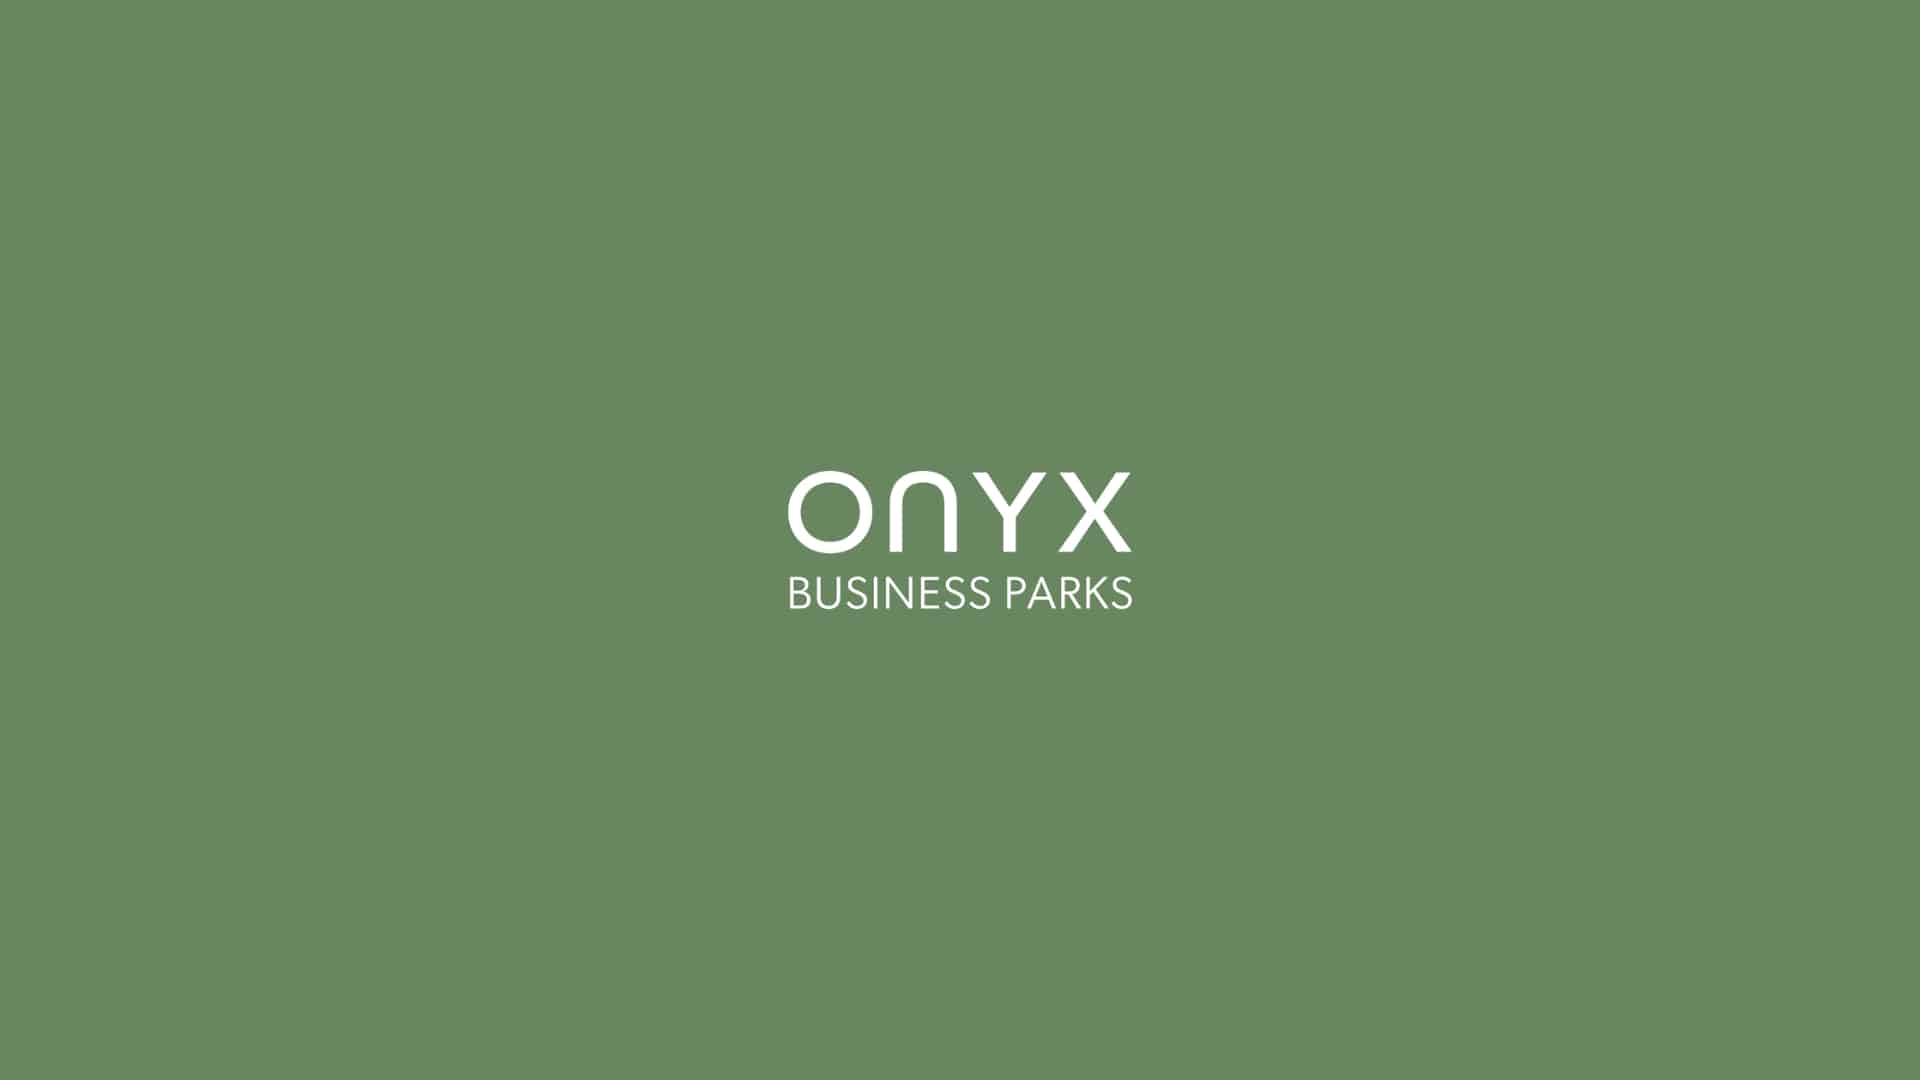 Onyx Business Parks white logo on green background